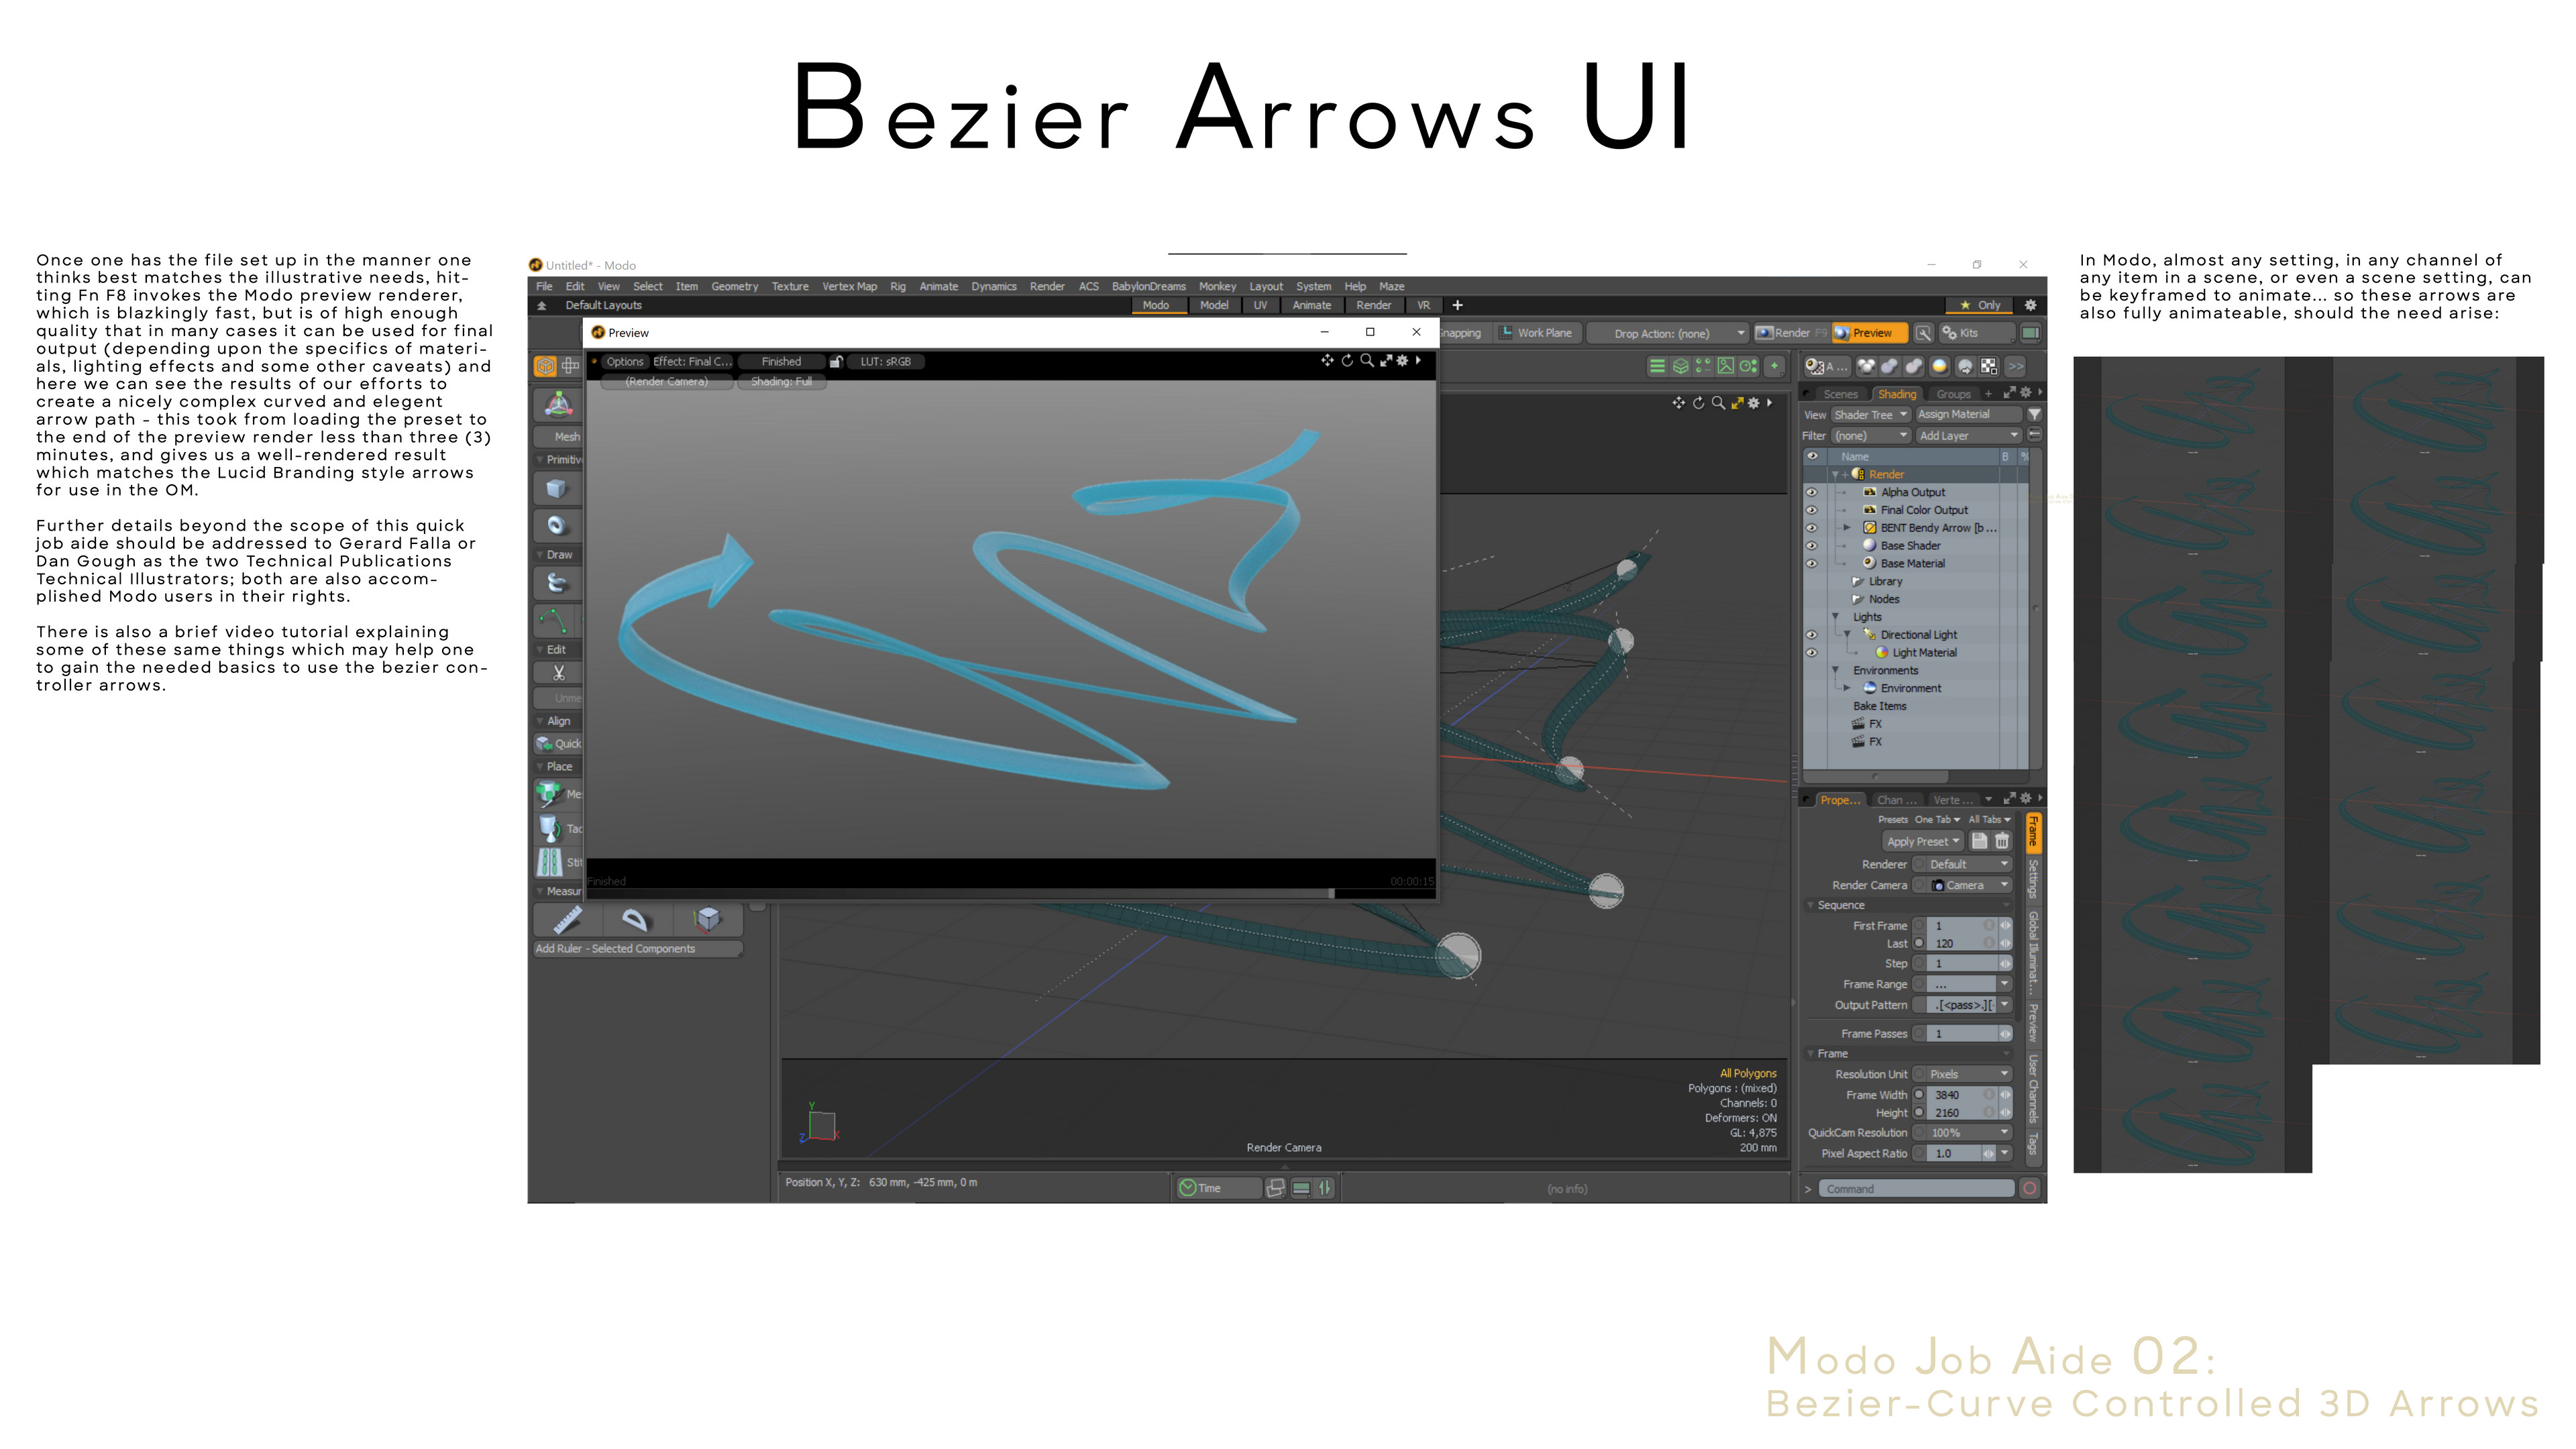 Part of an internal Job Aide meta doc I created to explain use of the bezier flexible arrow preset I developed, used and deployed for Lucid Motors.